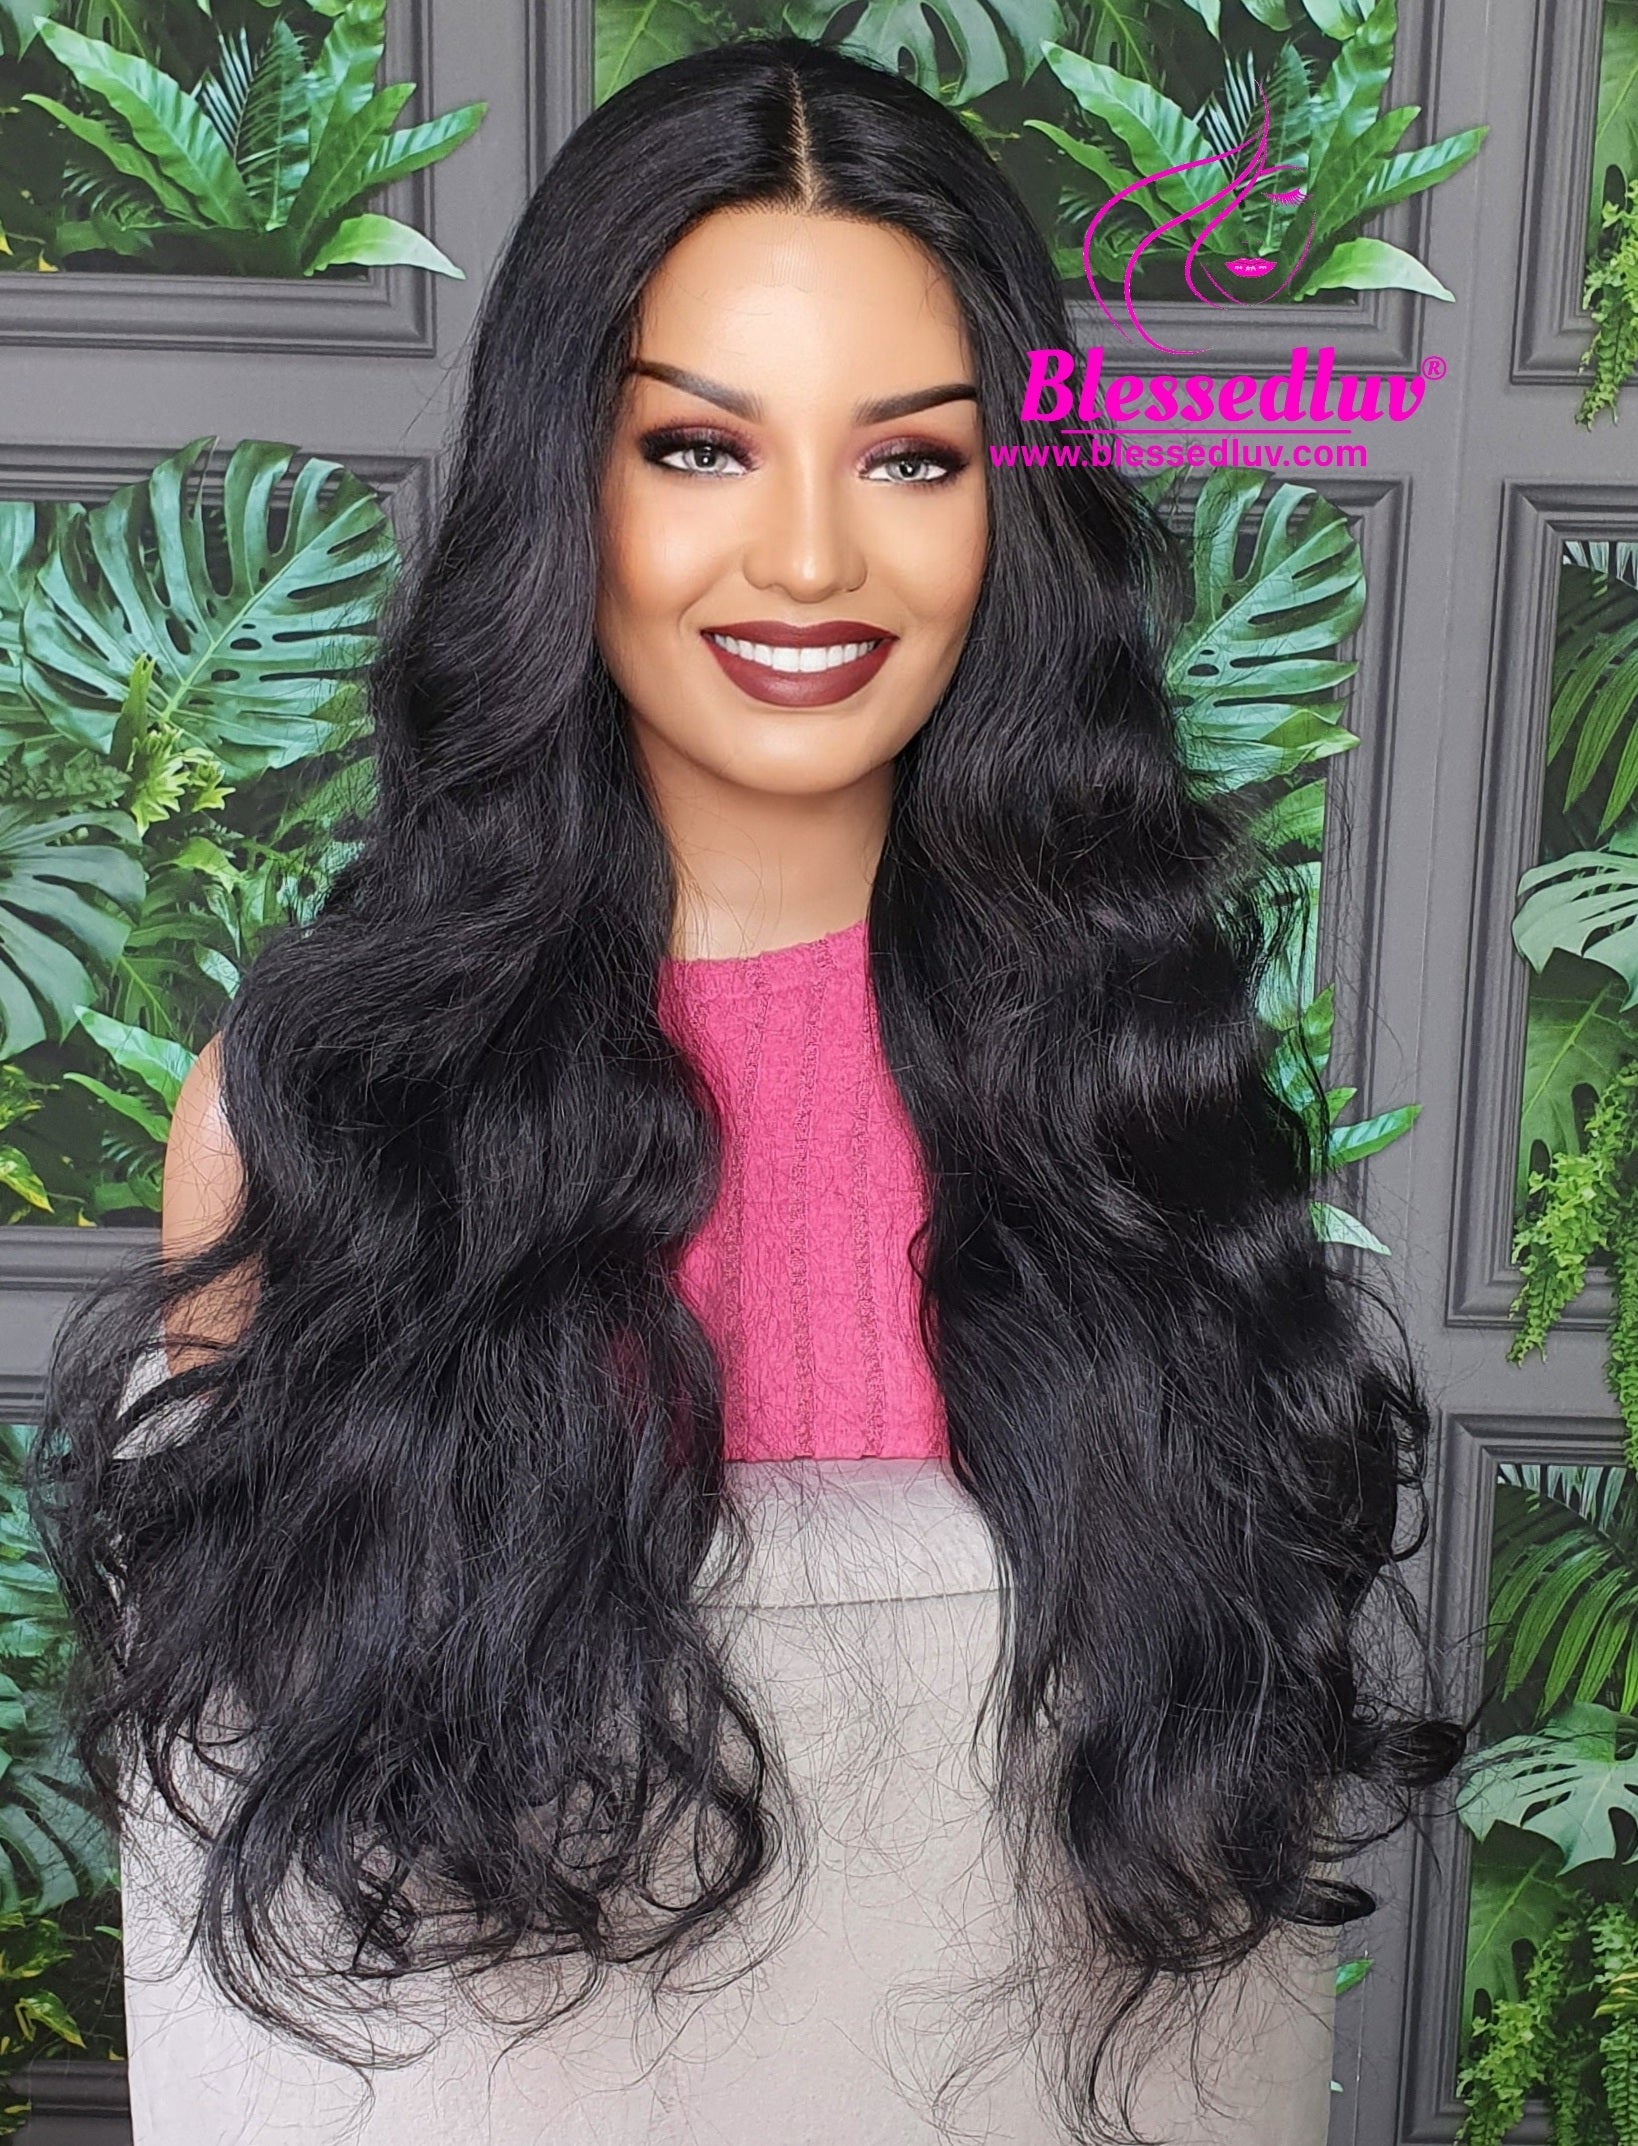 3 Blessedluv's Trusted Synthetic Wig Vendor List-Online Course-www.blessedluv.com-Brazilianweave.com